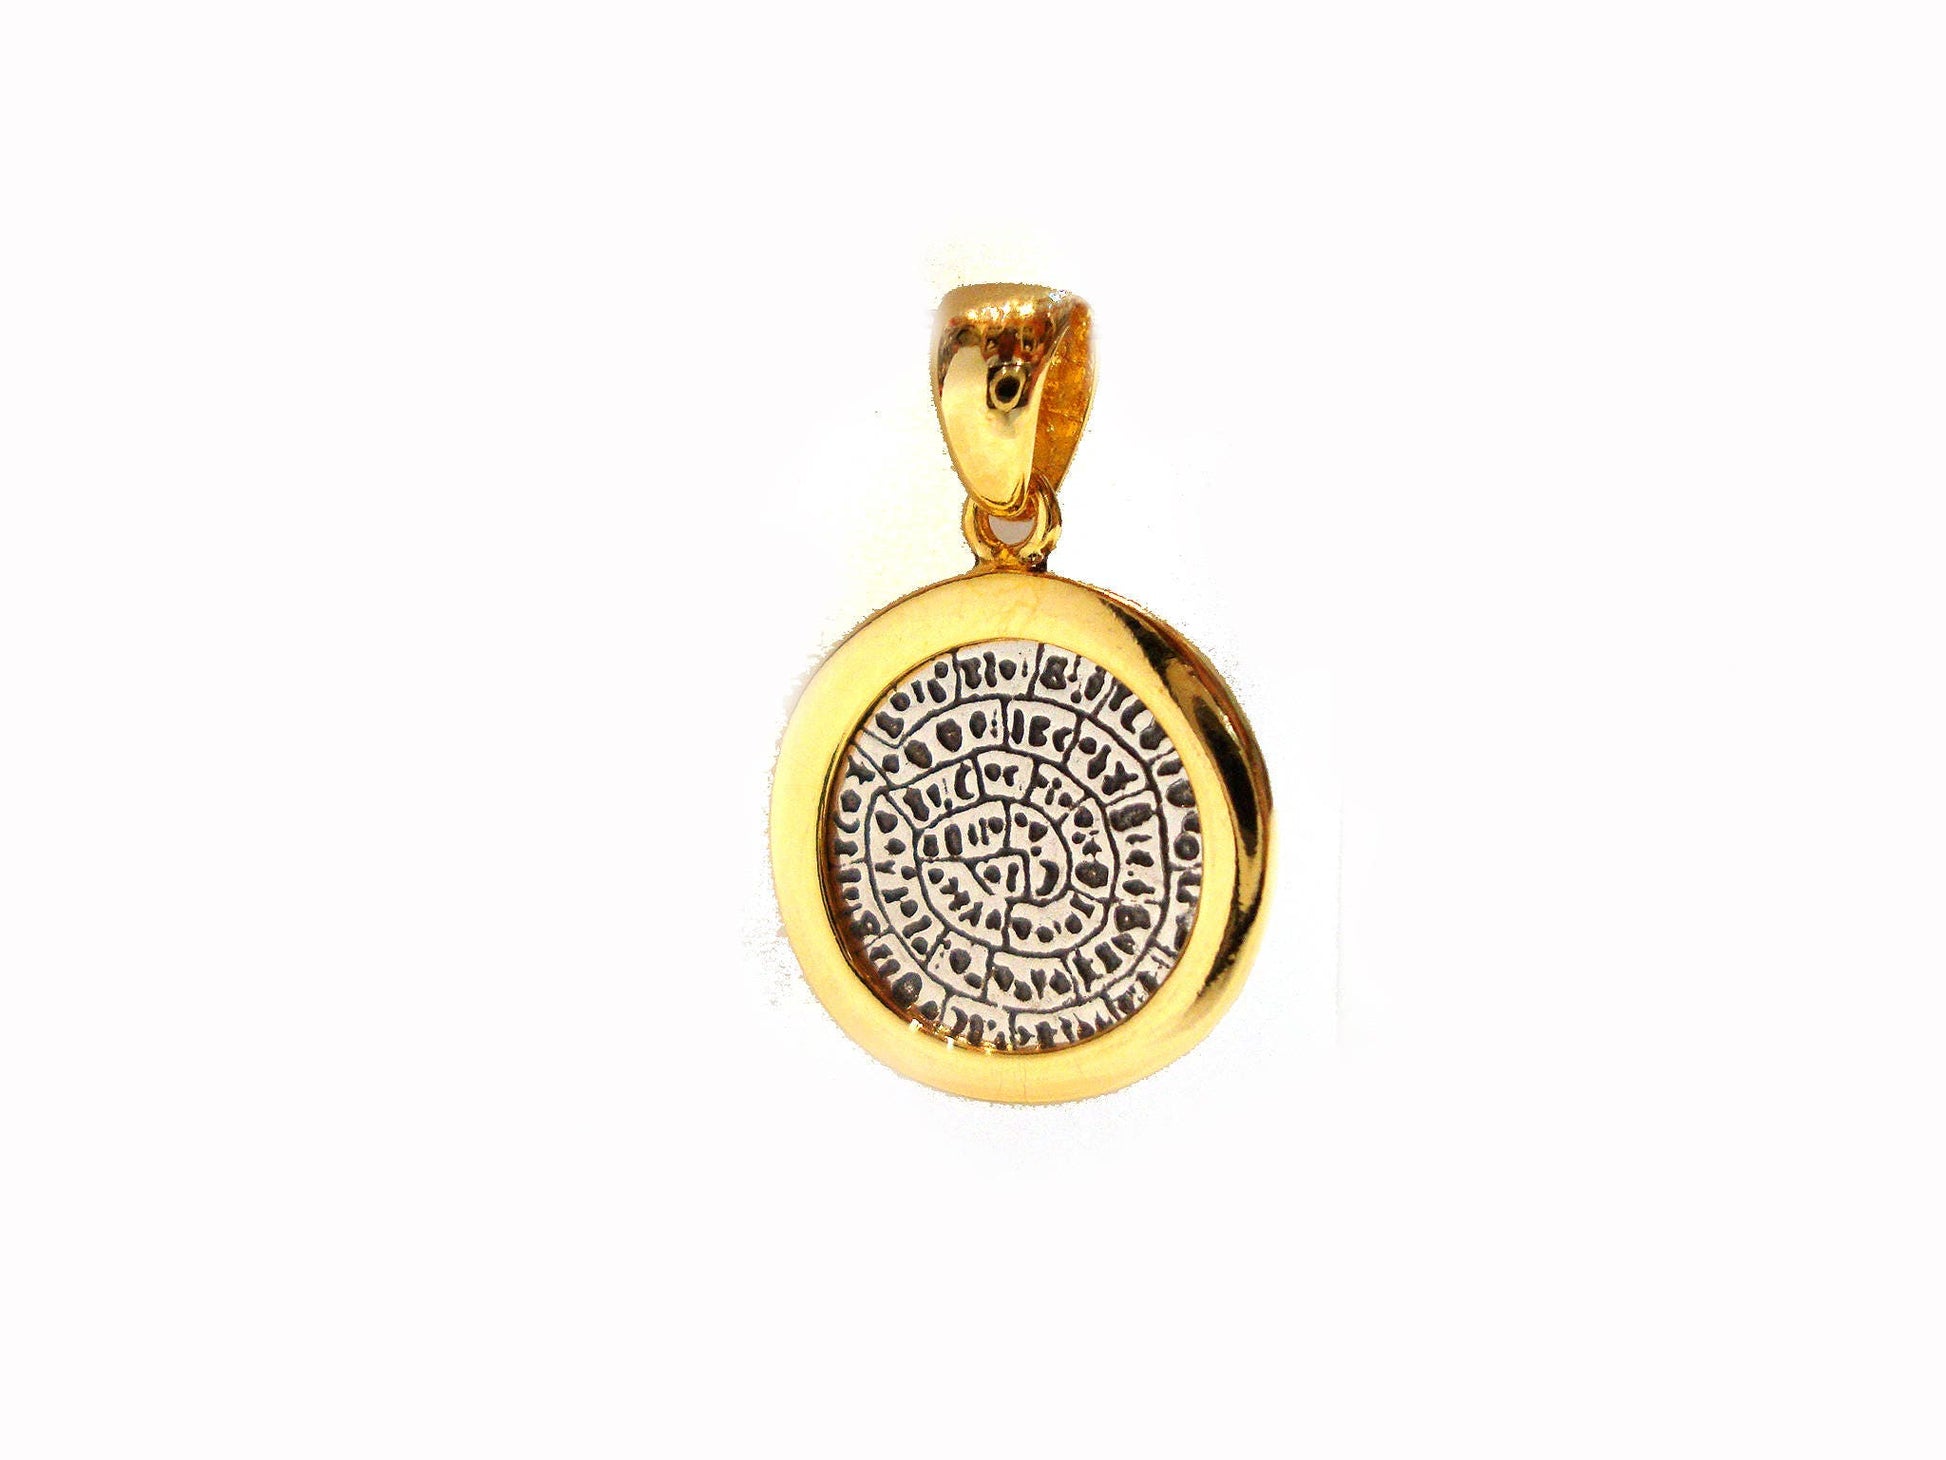 An elegant Greek Silver Jewelry pendant plated with 22K gold, featuring an Ancient Greek Minoan Phaistos Disc design, handcrafted in Greece.